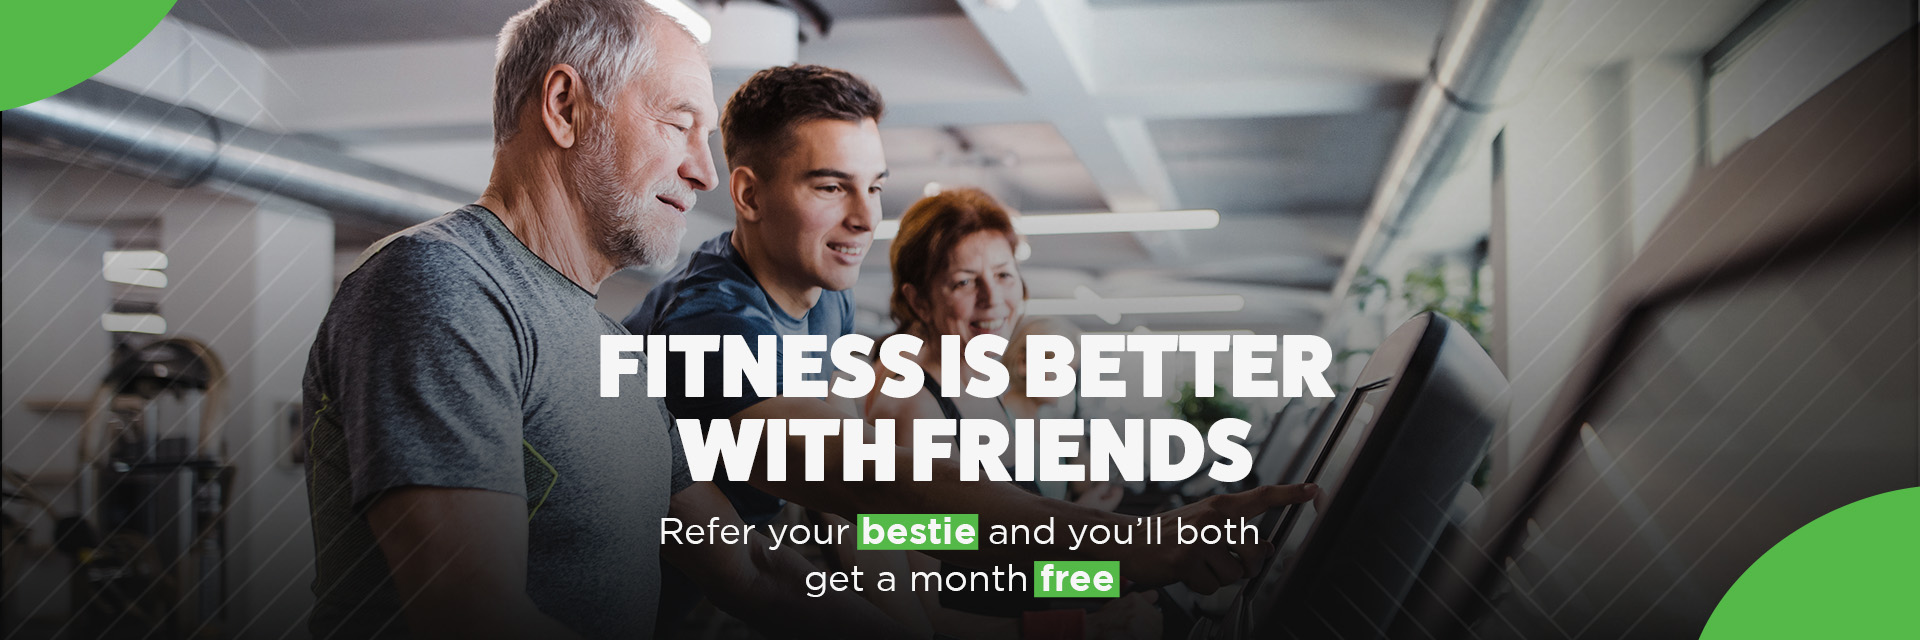 Fitness is Better with Friends